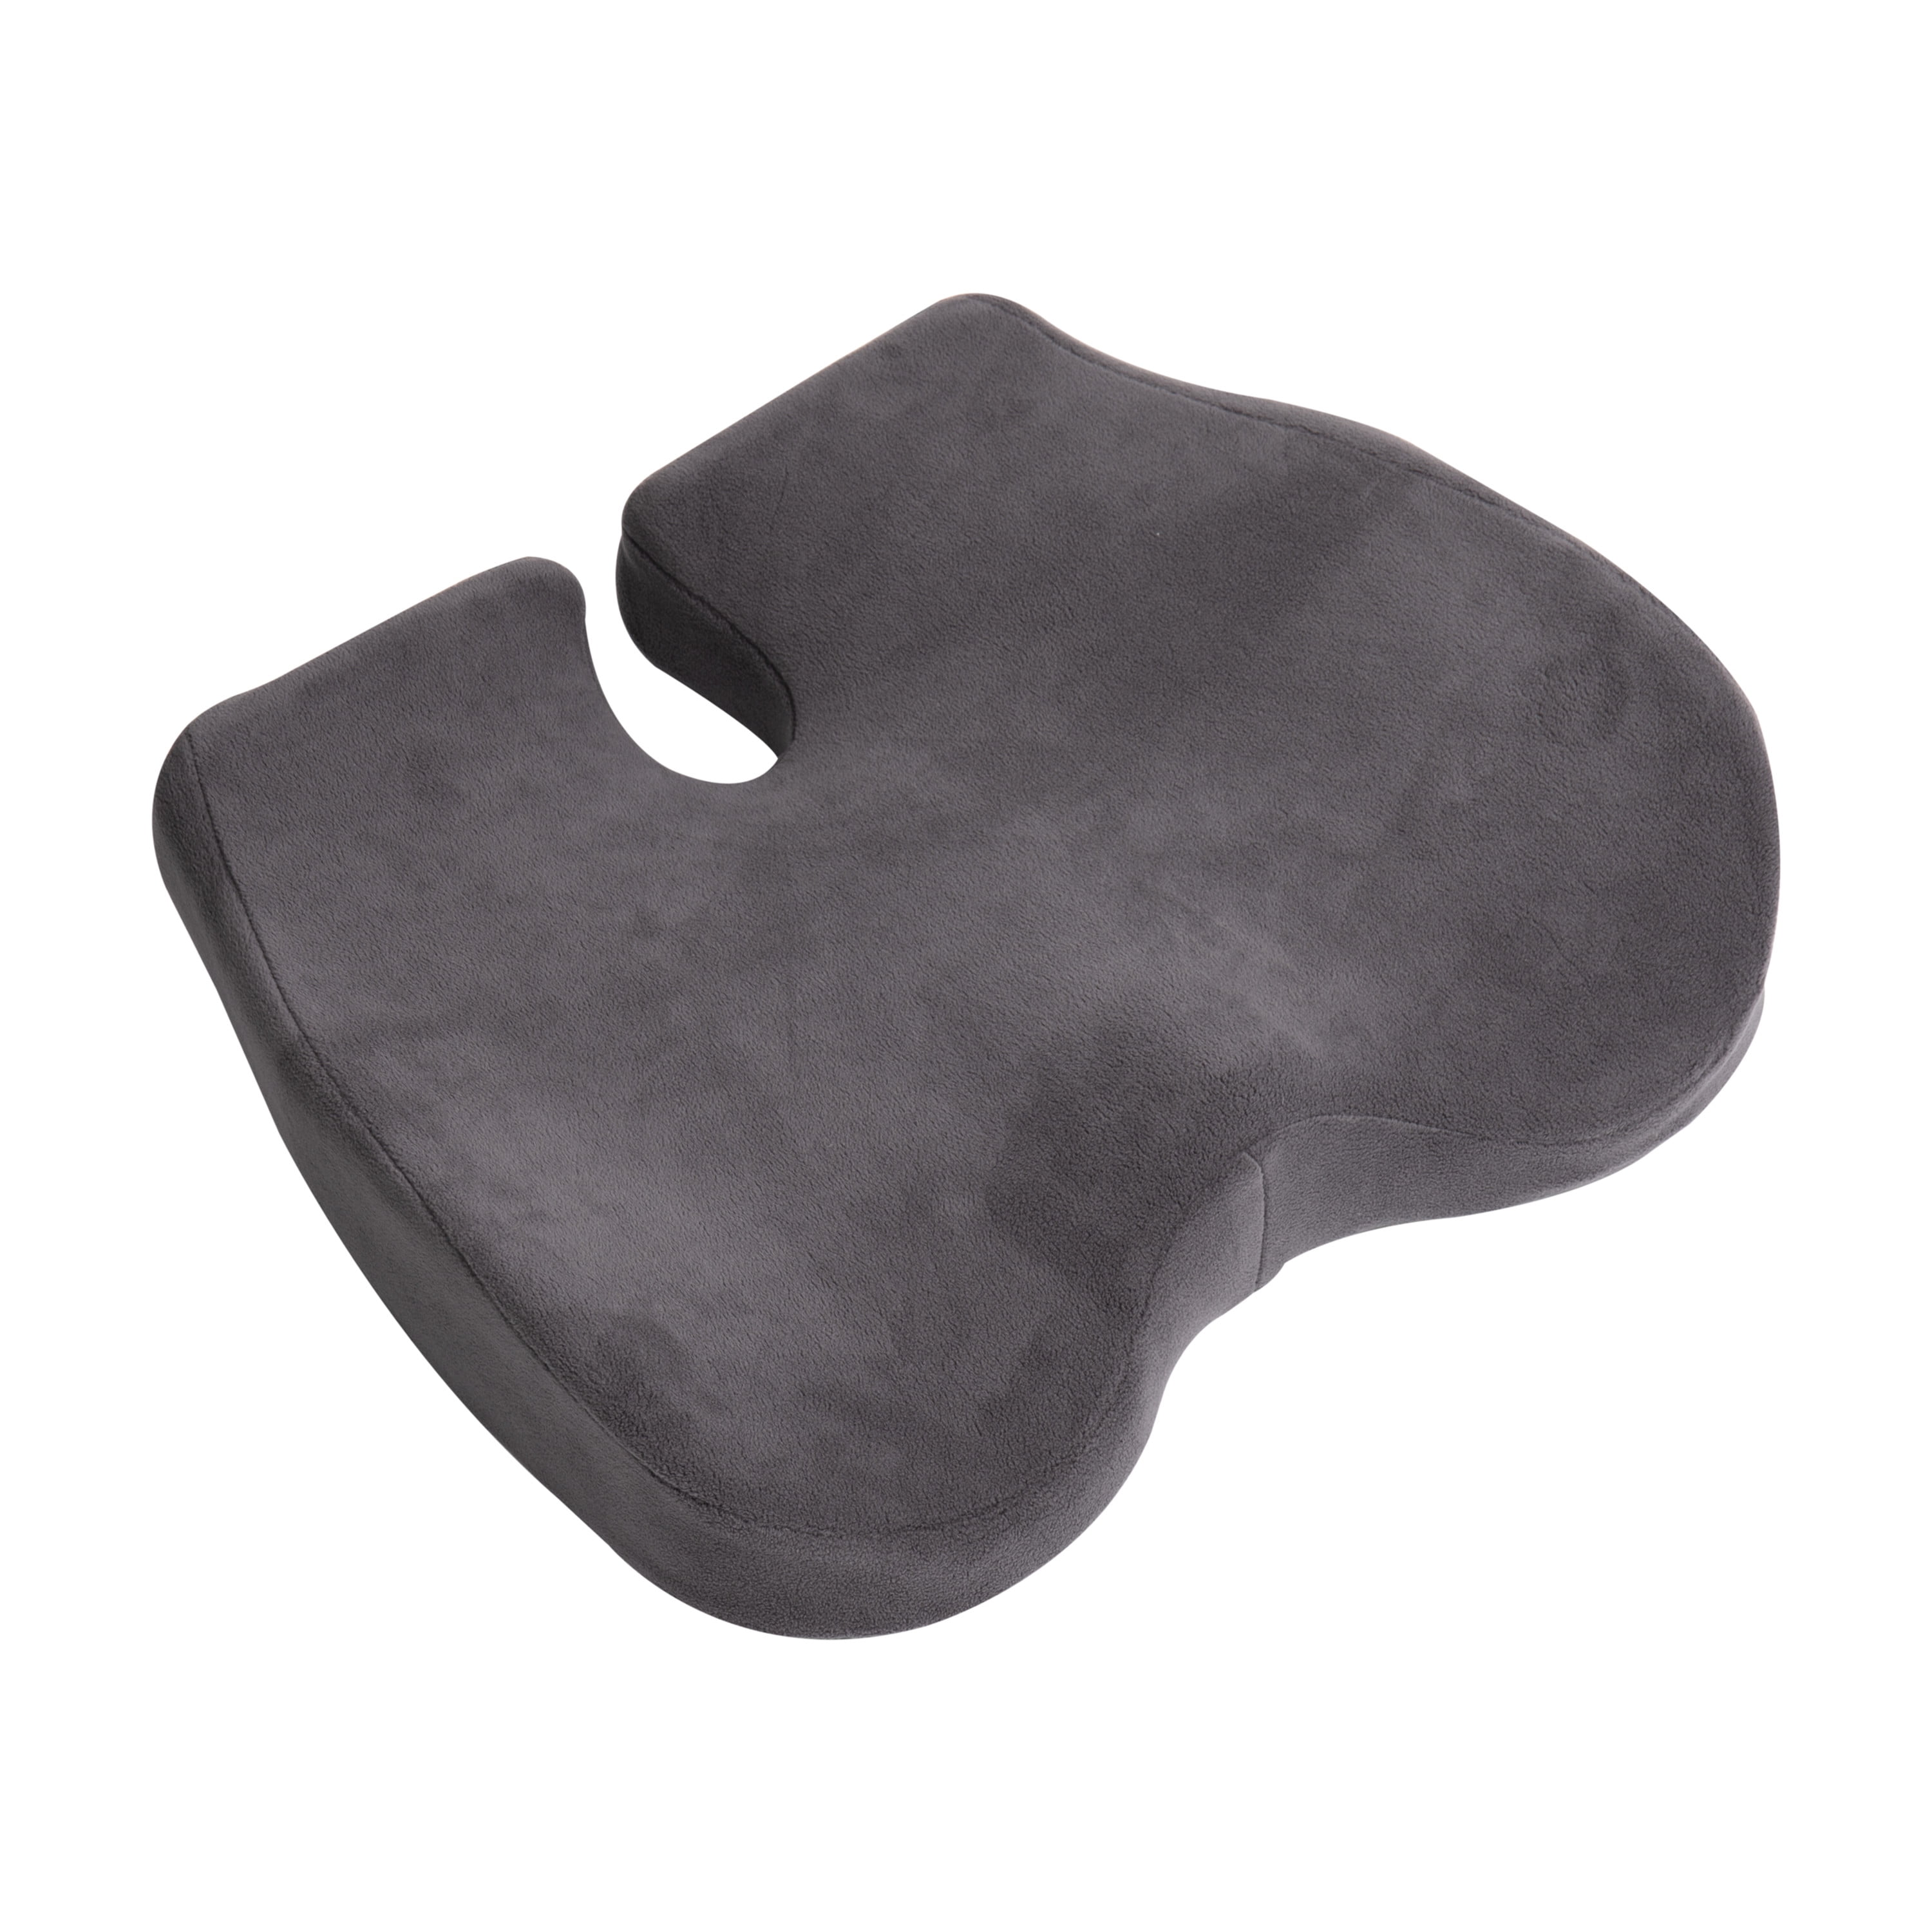 CNDT Gel Cool Memory Foam Orthopedic Seat Cushion for Office Chair Car Driver Airplane Help Sciatica Nerve Tailbone Hemorrhoids Back Hip Sitting Pain Relief Black